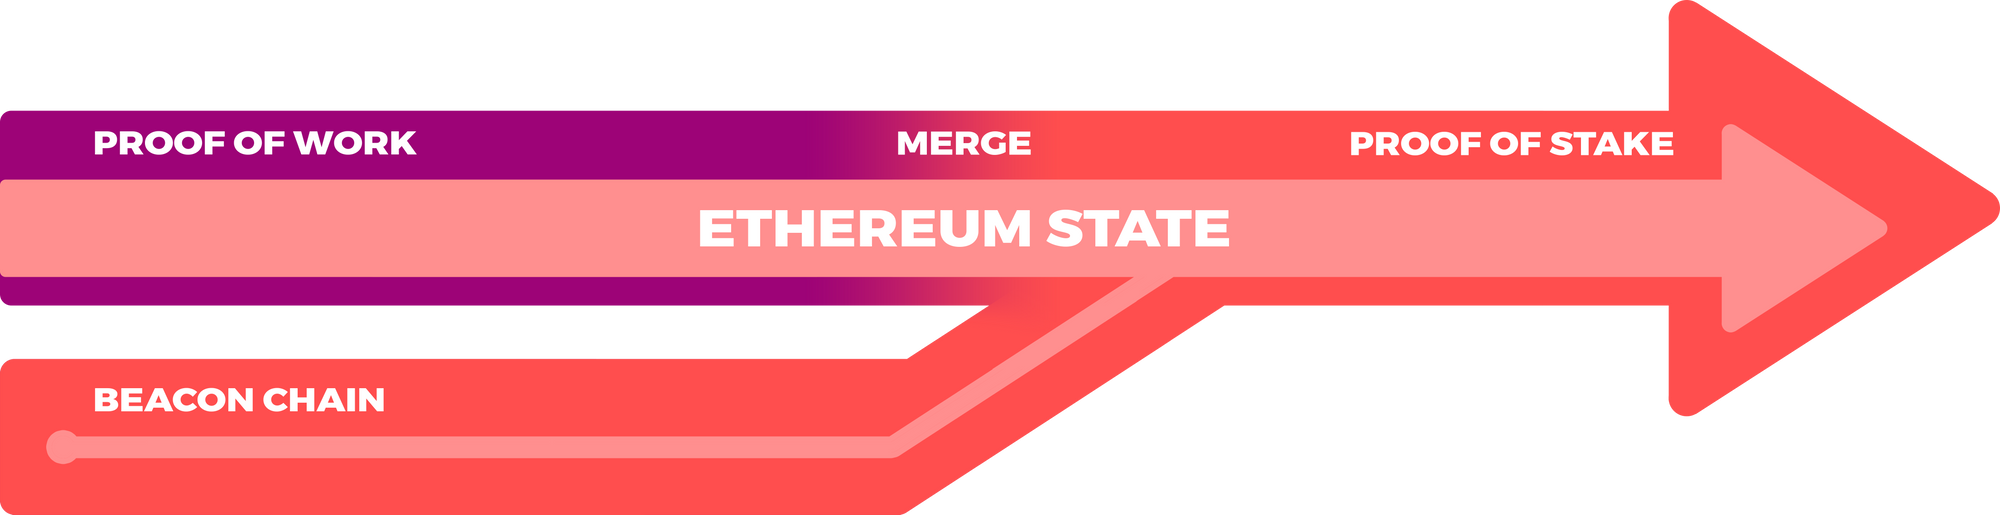 Merge graphic - proof of work chain merging with proof of stake Beacon Chain